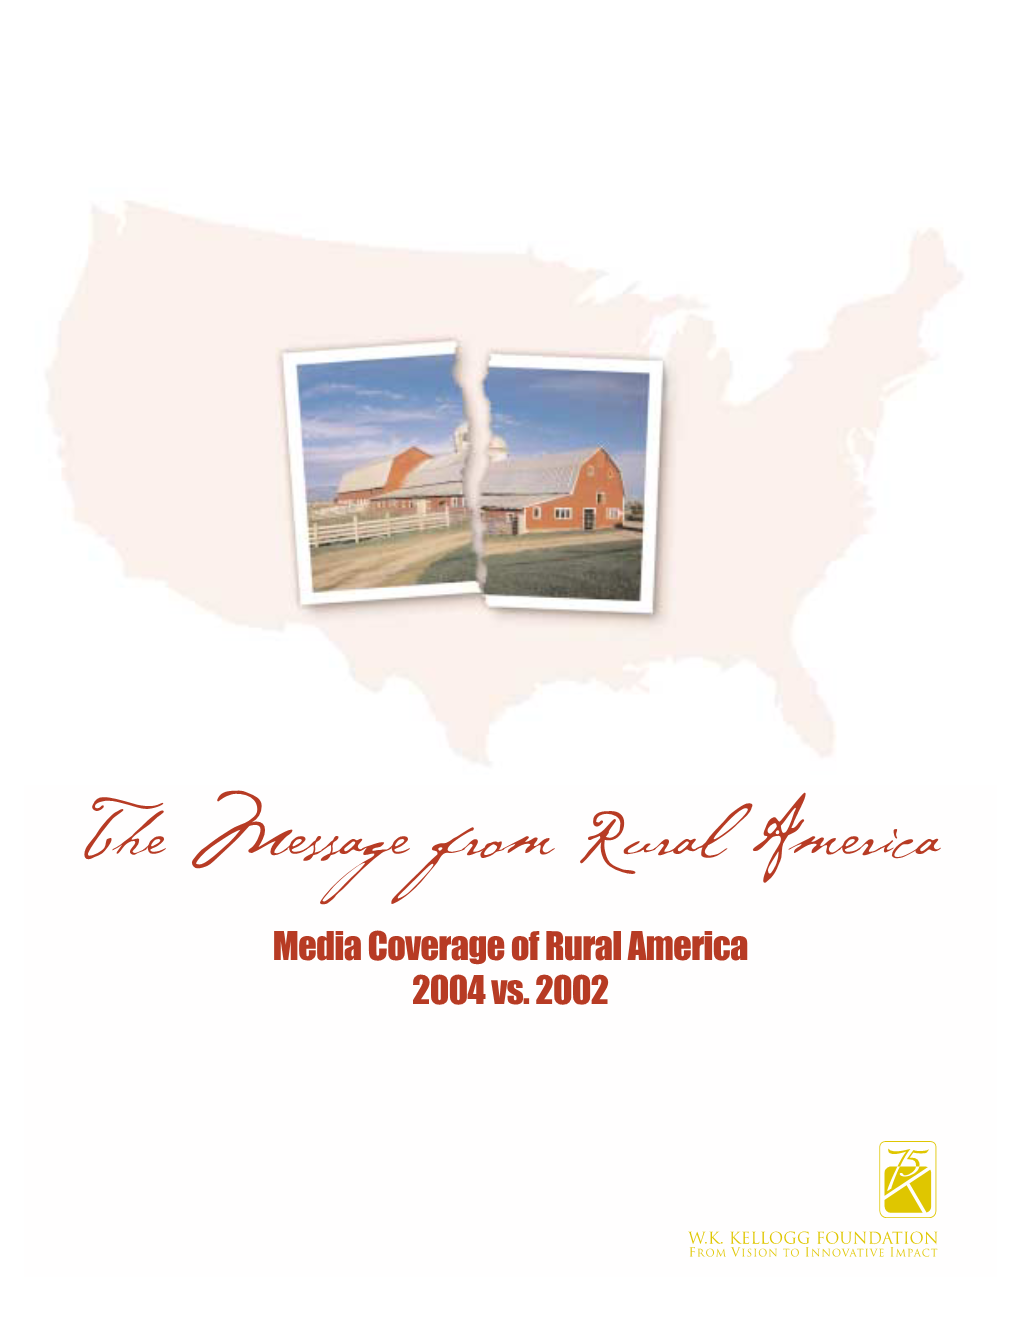 The Message from Rural America Media Coverage of Rural America 2004 Vs